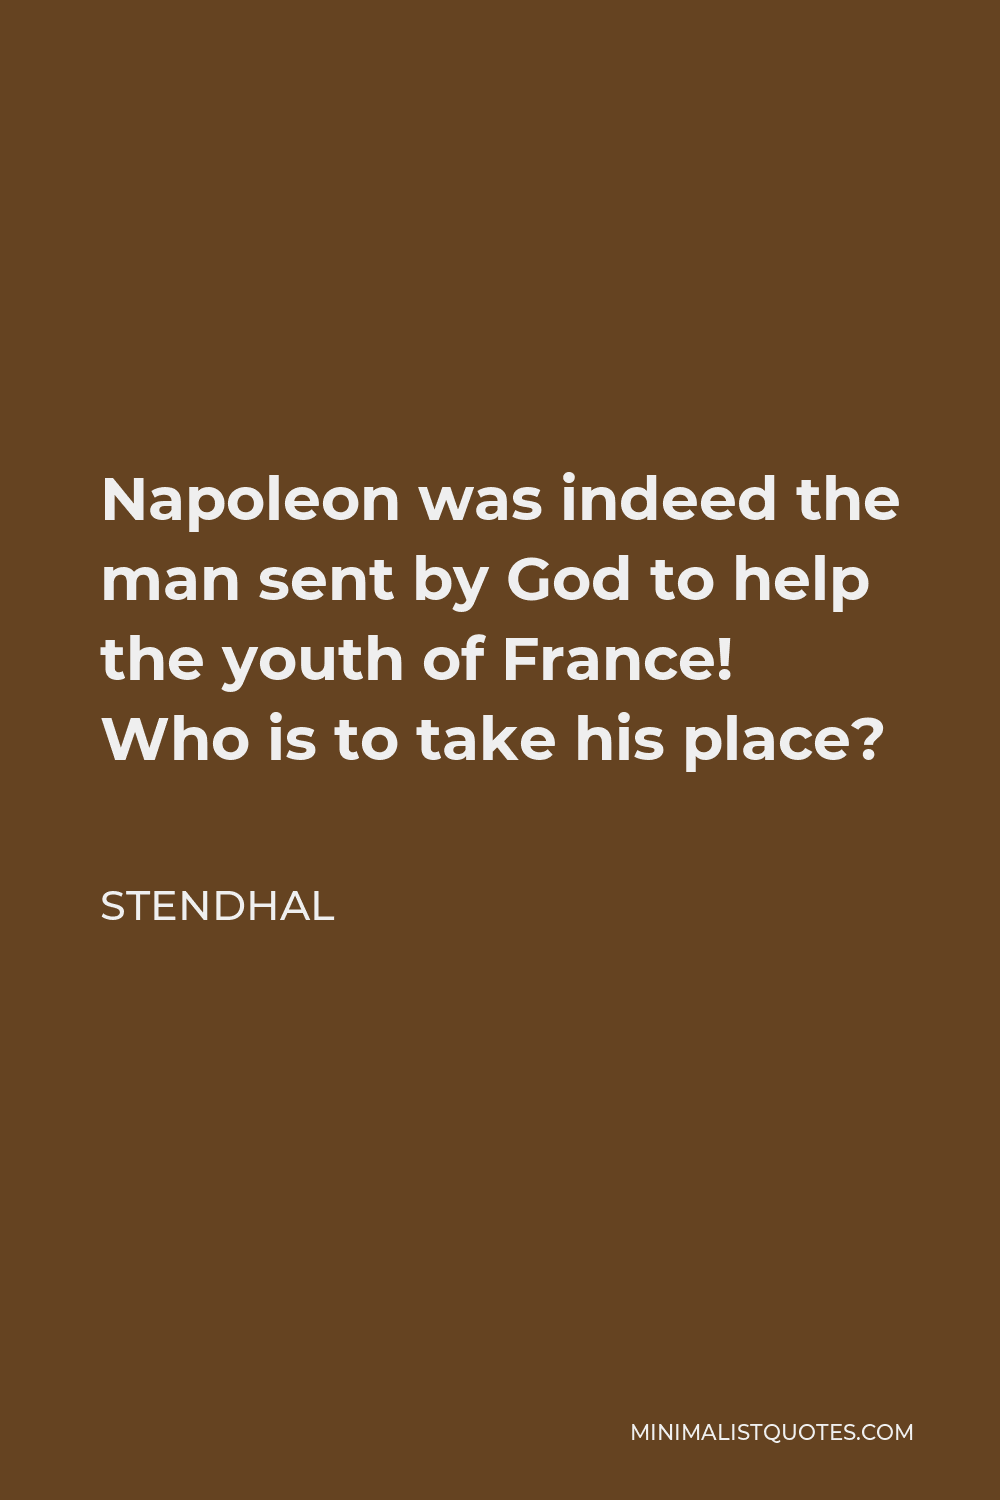 Stendhal Quote - Napoleon was indeed the man sent by God to help the youth of France! Who is to take his place?